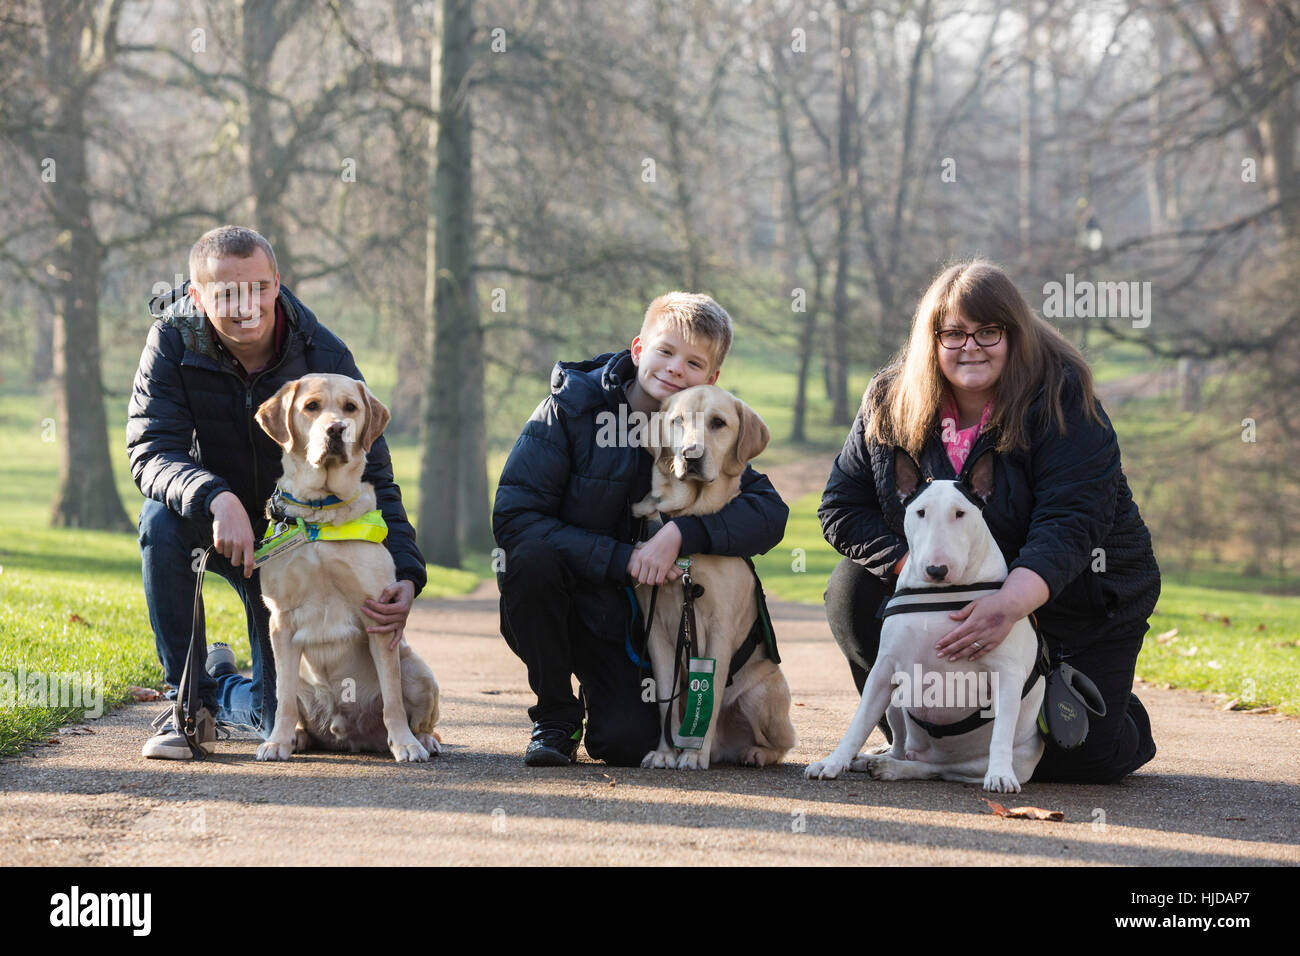 London, UK. 24th Jan, 2017. L-R: Hudson, the Labrador Retriever guide dog with owner Nathan Edge, 22, from North Hykeham, Lincs, Caddie the Labrador Retriever autism awareness dog with owner Joel Sayer, 13, from Newquay, Cornwall and Bowser, the Bull Terrier, with owner Sally Degan, 26, from Scunthorpe, Lincs. The Kennel Club and Eukanuba have selected four inspiring Hero Dogs as the 2017 finalists. They forward to the public vote with the winner being announced at Crufts. Charlie, the Military Dog with the British Army did not attend the photocall. Credit: Vibrant Pictures/Alamy Live News Stock Photo